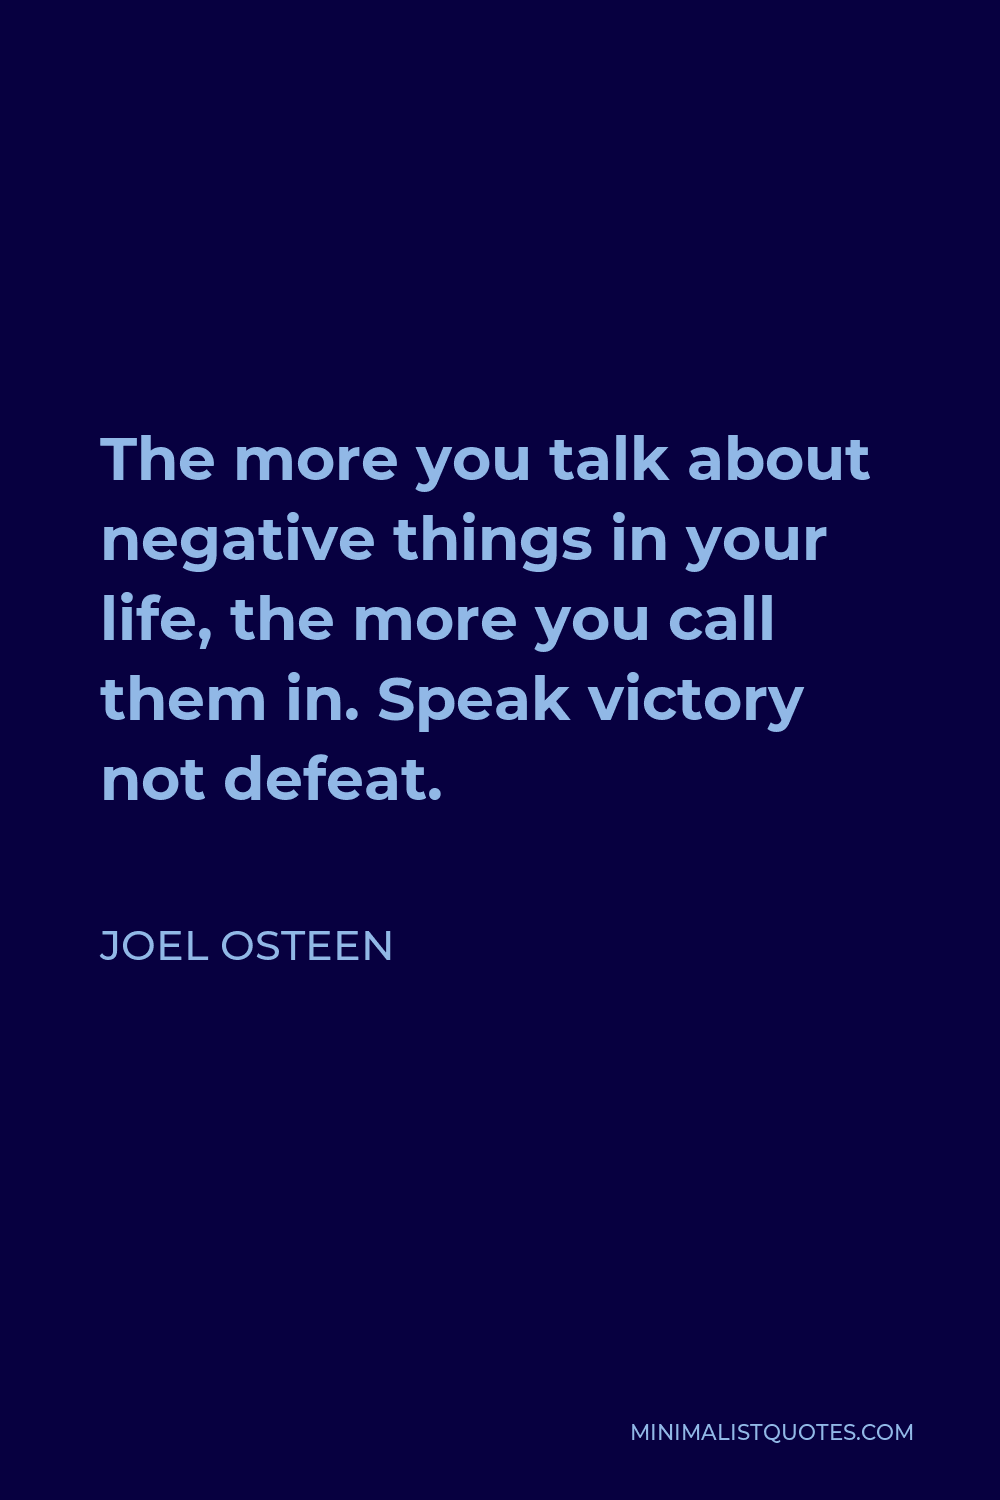 Joel Osteen Quote - The more you talk about negative things in your life, the more you call them in. Speak victory not defeat.